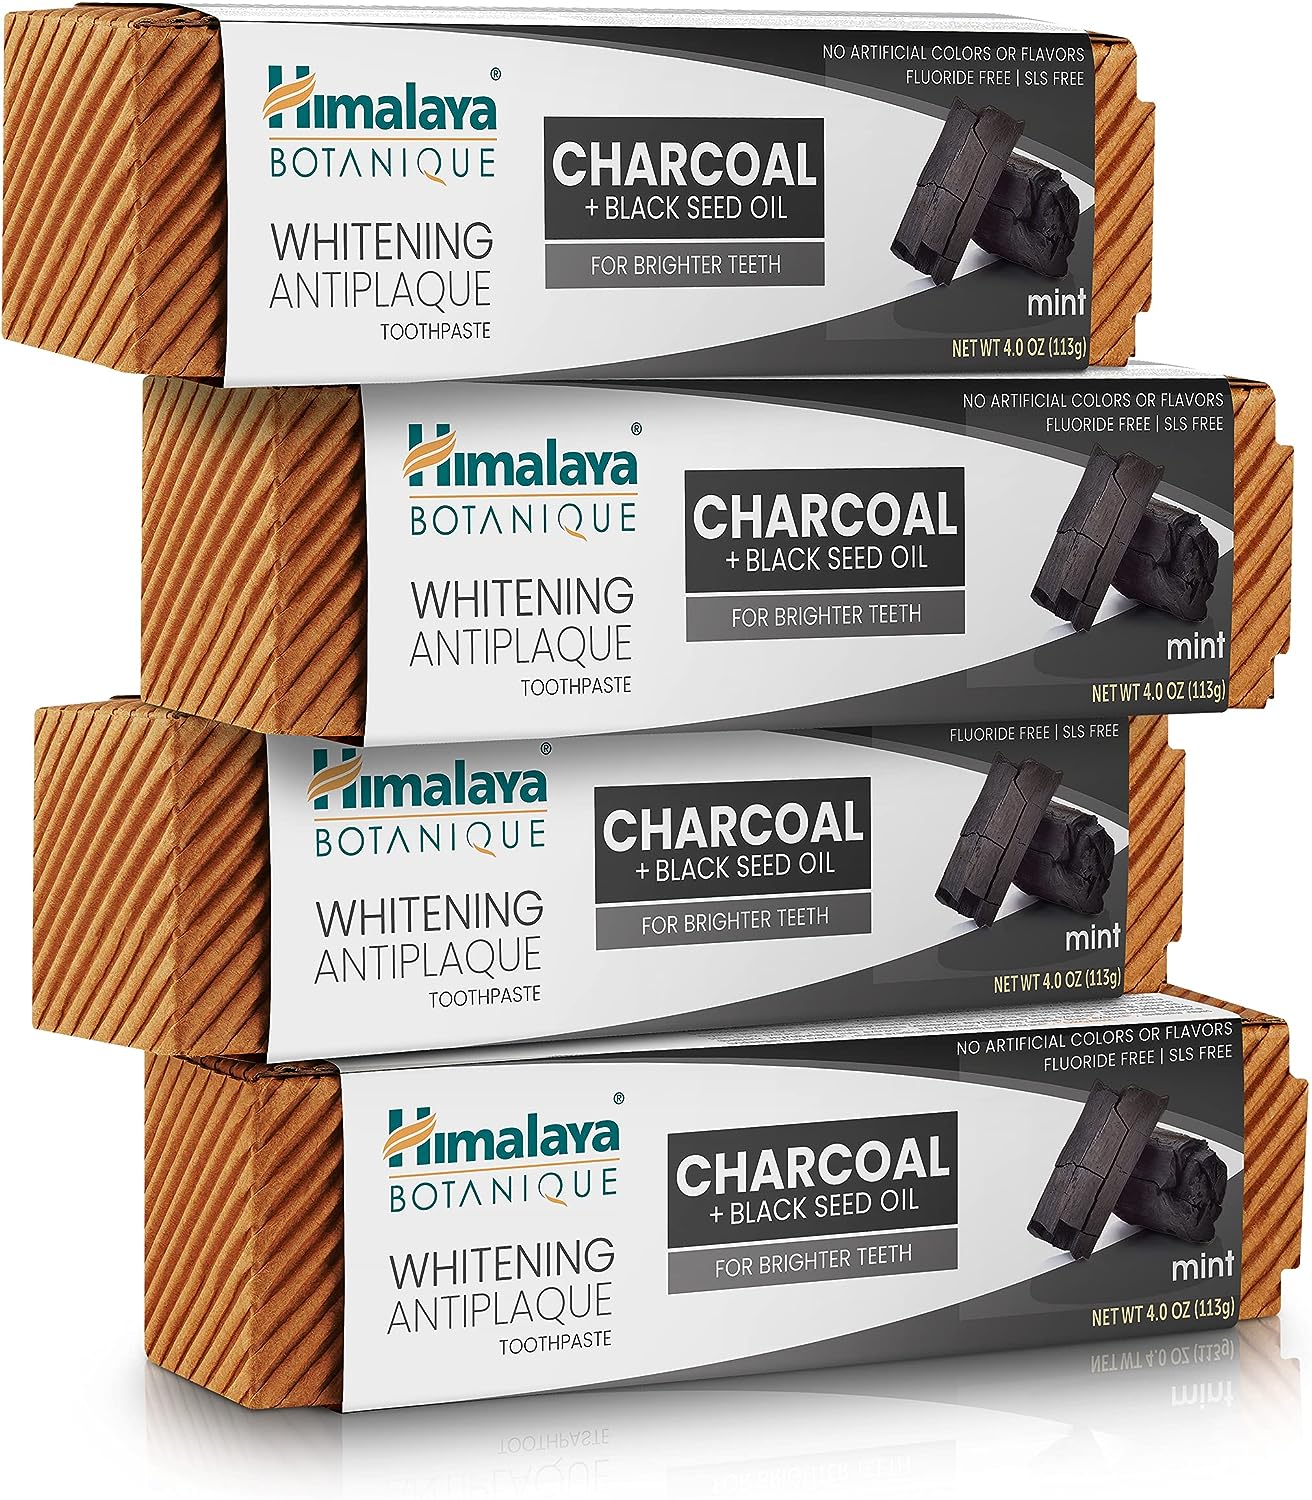 Himalaya Botanique Whitening Antiplaque Toothpaste with Charcoal + Black Seed Oil, uoride Free, for Whiter Teeth, 4 , 4 Pack